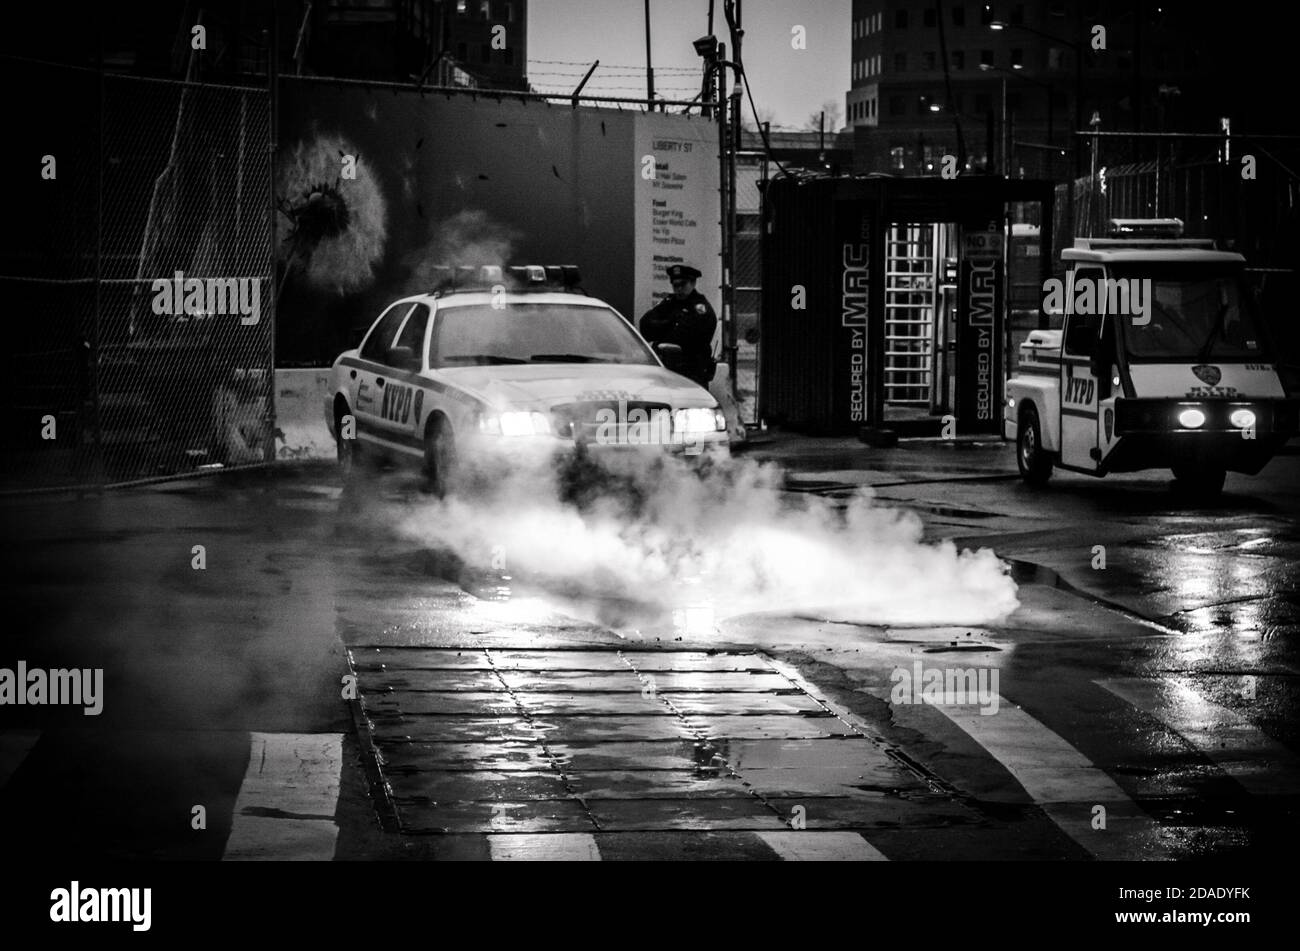 Black and White Photo of a Police Vehicle with its Headlights Shed Light on Steam Cominf of the Sewers in Lower Manhattan, New York City, USA Stock Photo